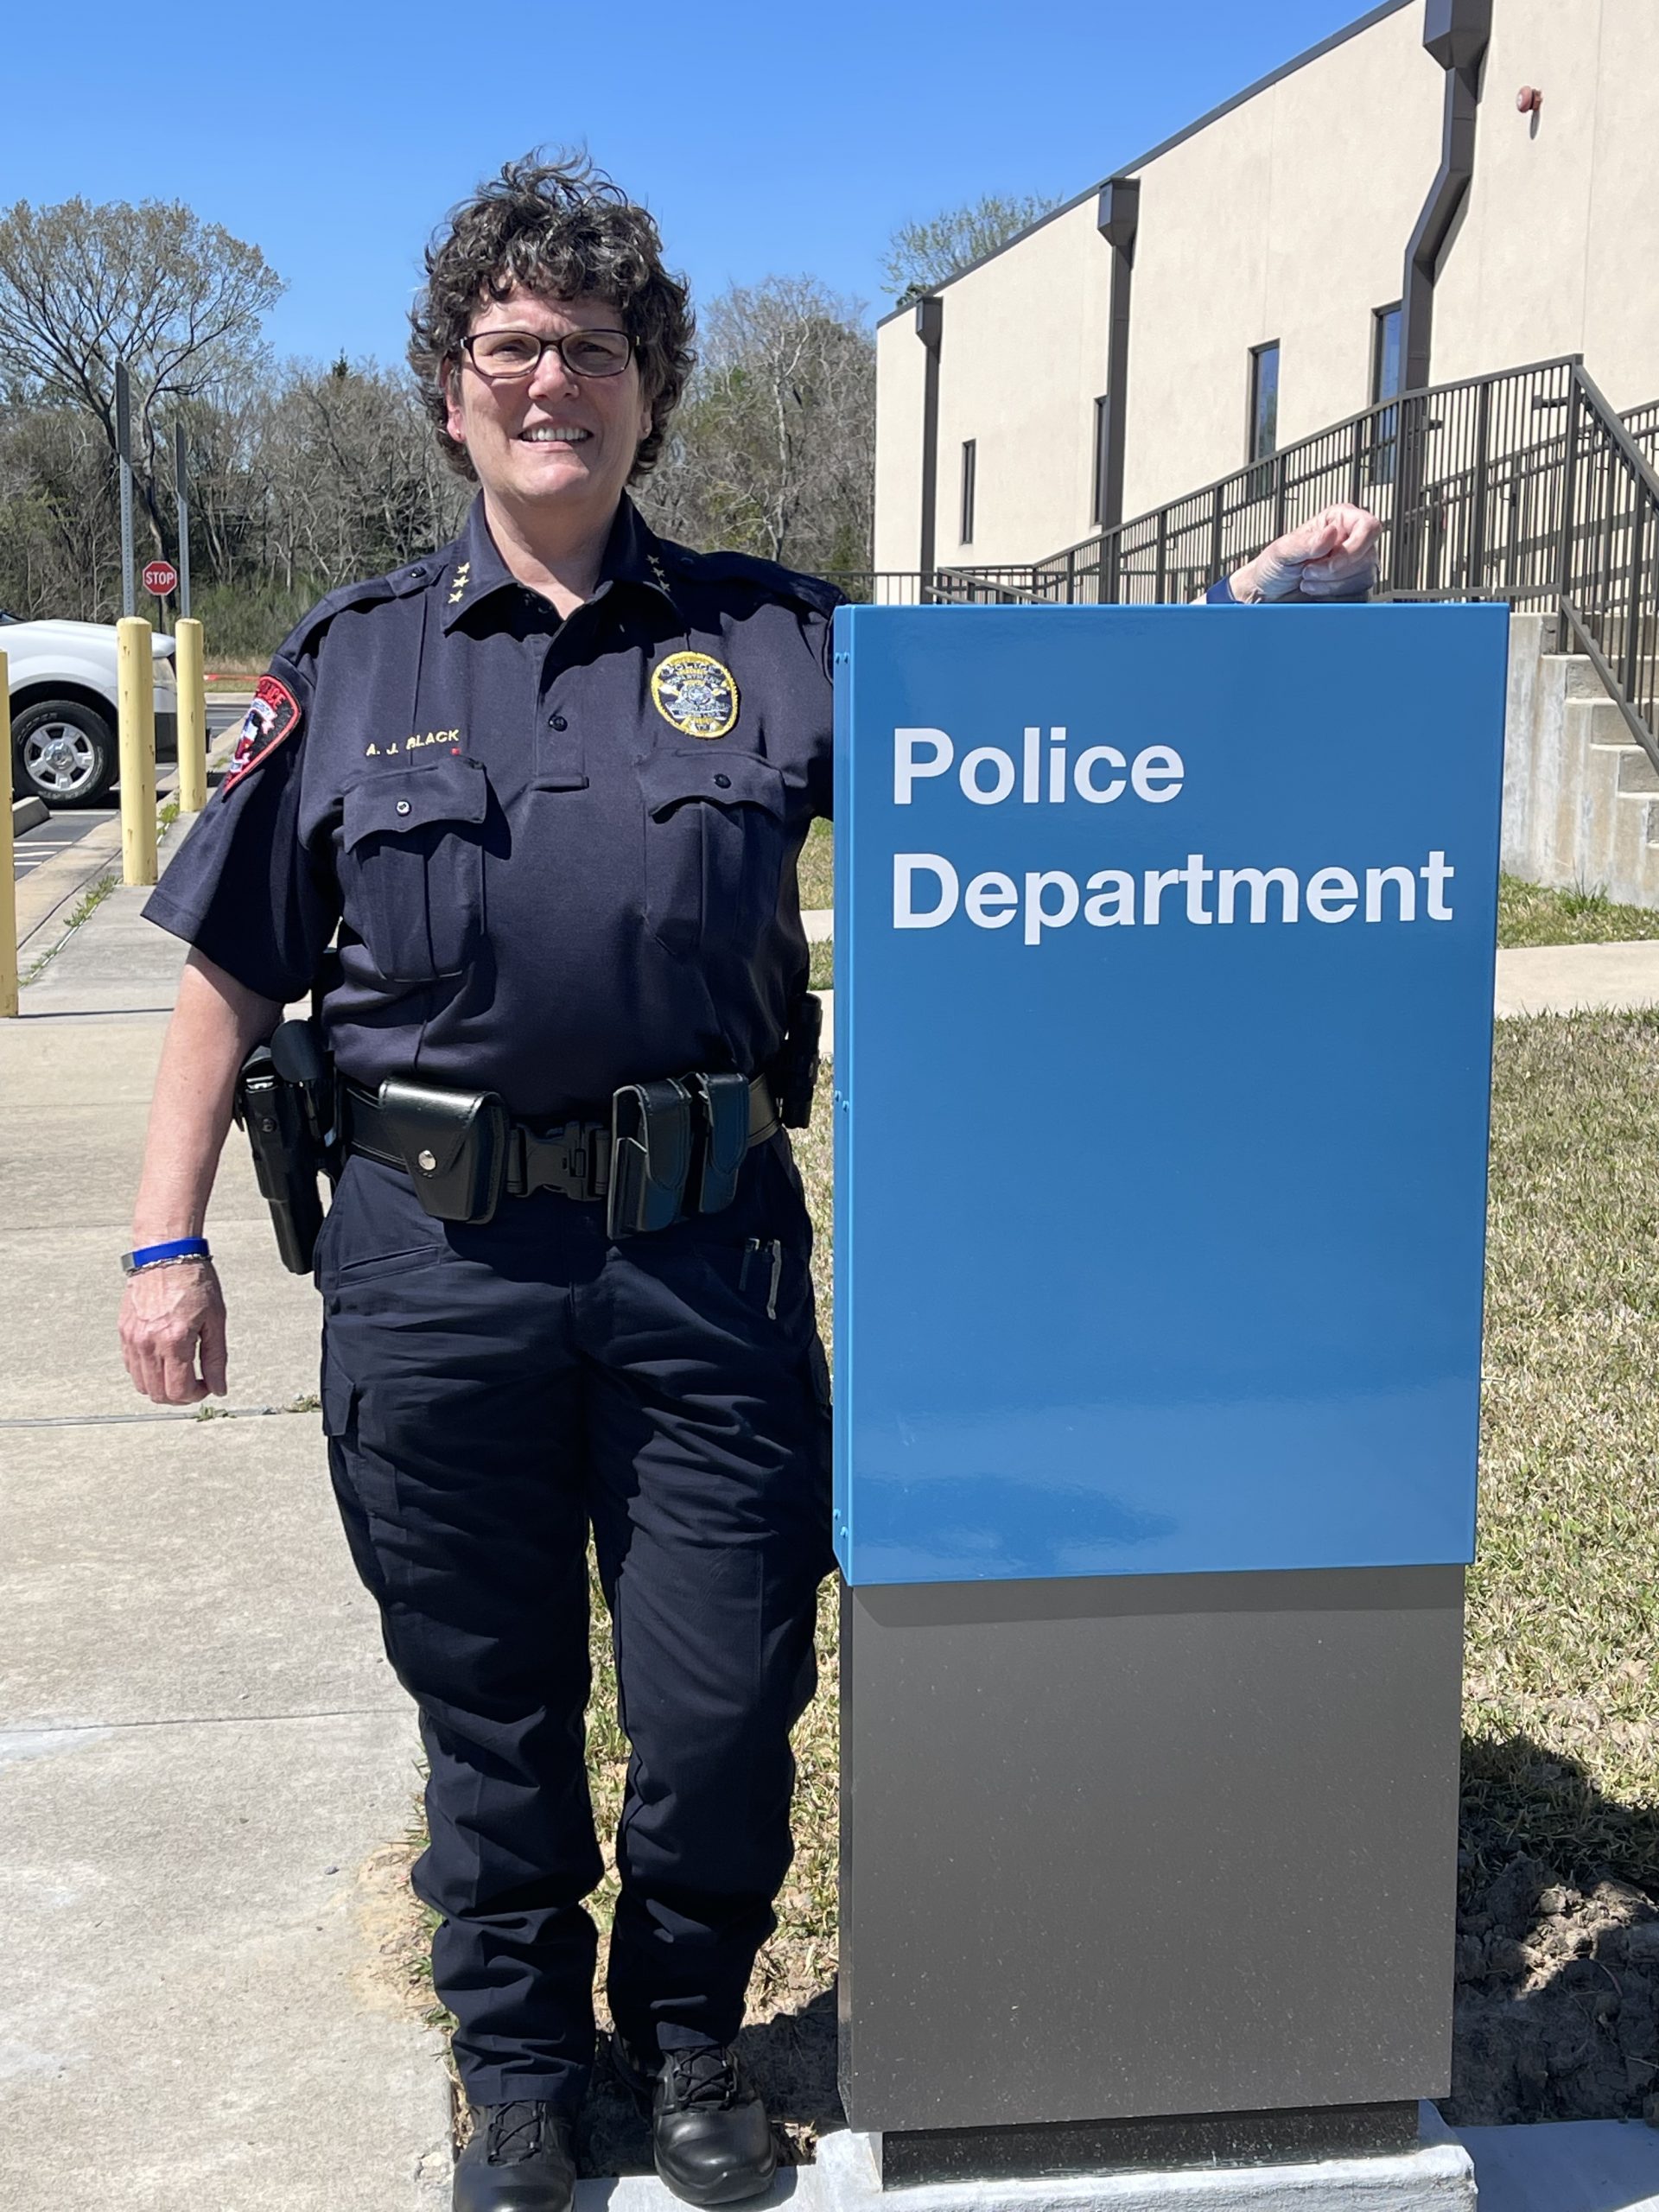 IMAGE: UHCL Assistant Chief of Police Andrea Black stands next to UHCL campus police department sign in uniform.